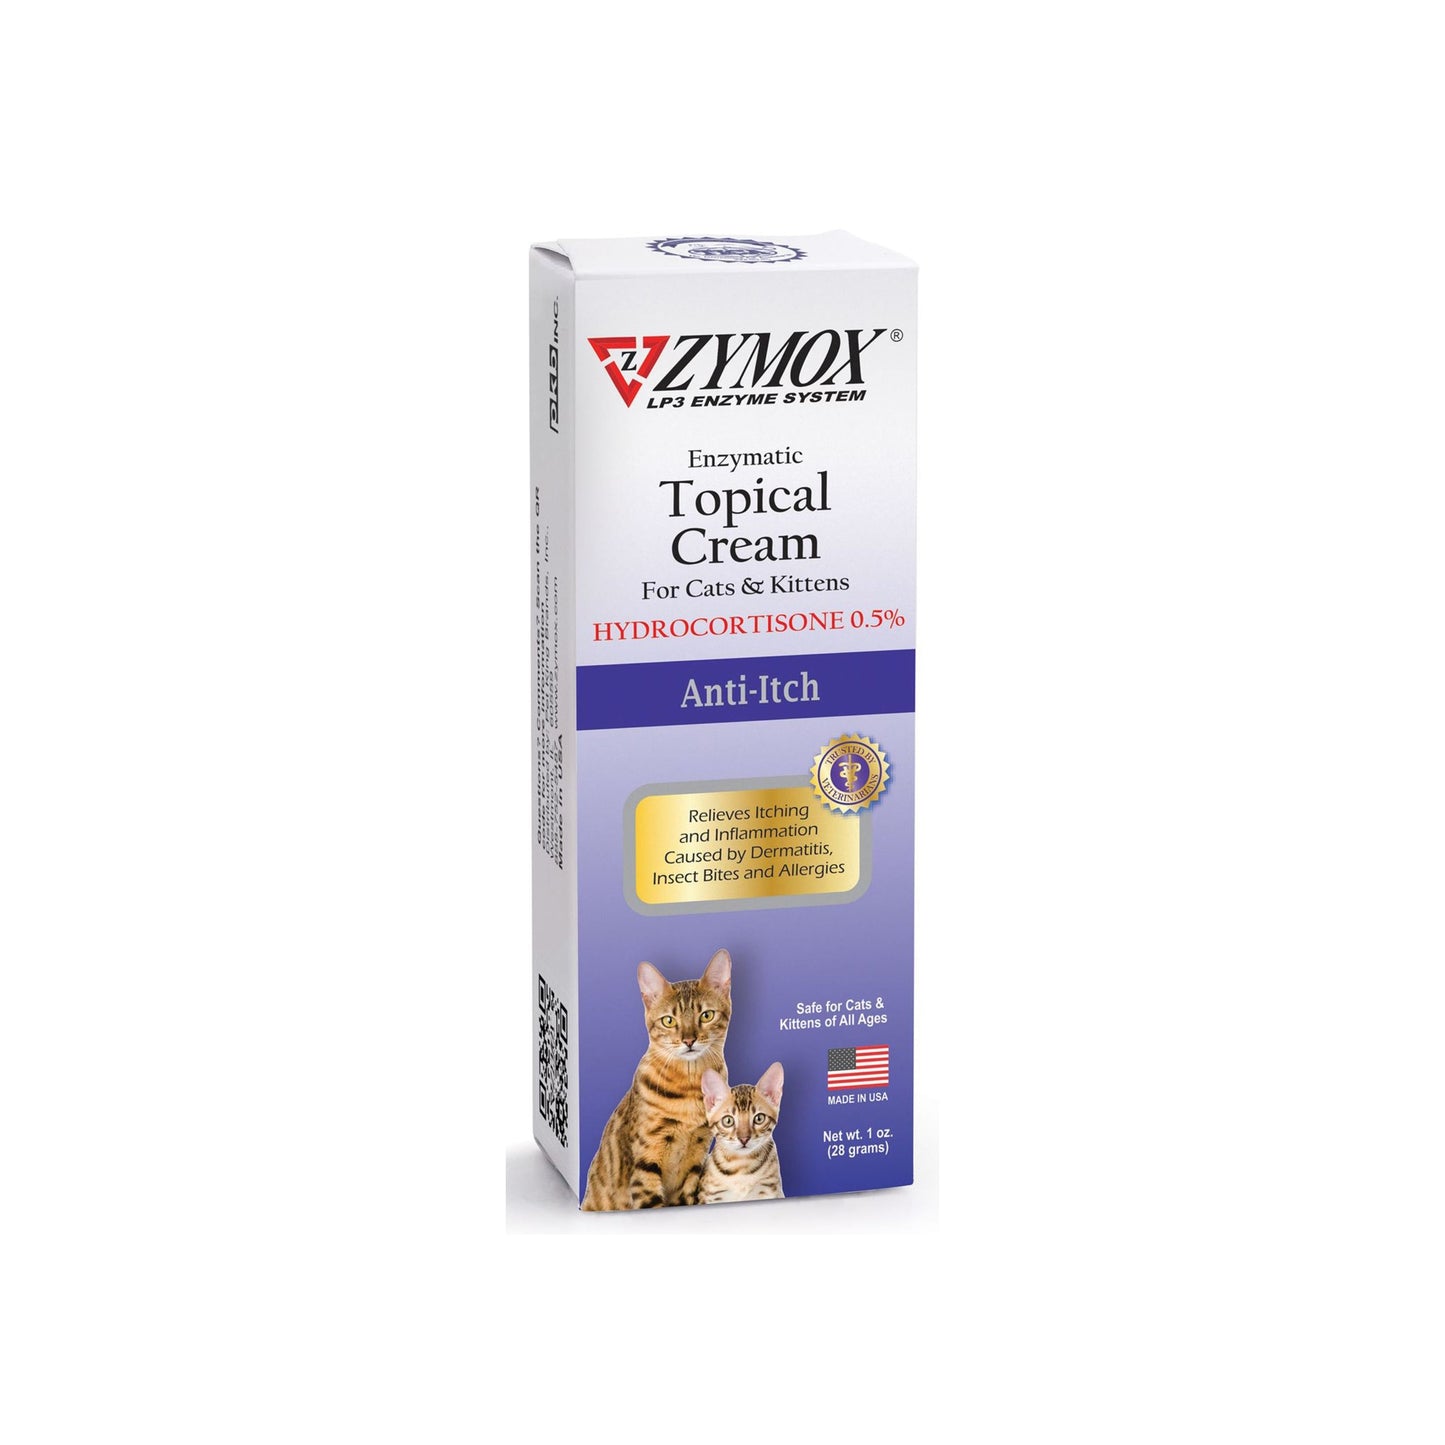 Zymox Enzymatic Topical Cream 0.5% Hydrocortisone for Cats & Kittens 1ea/1 oz